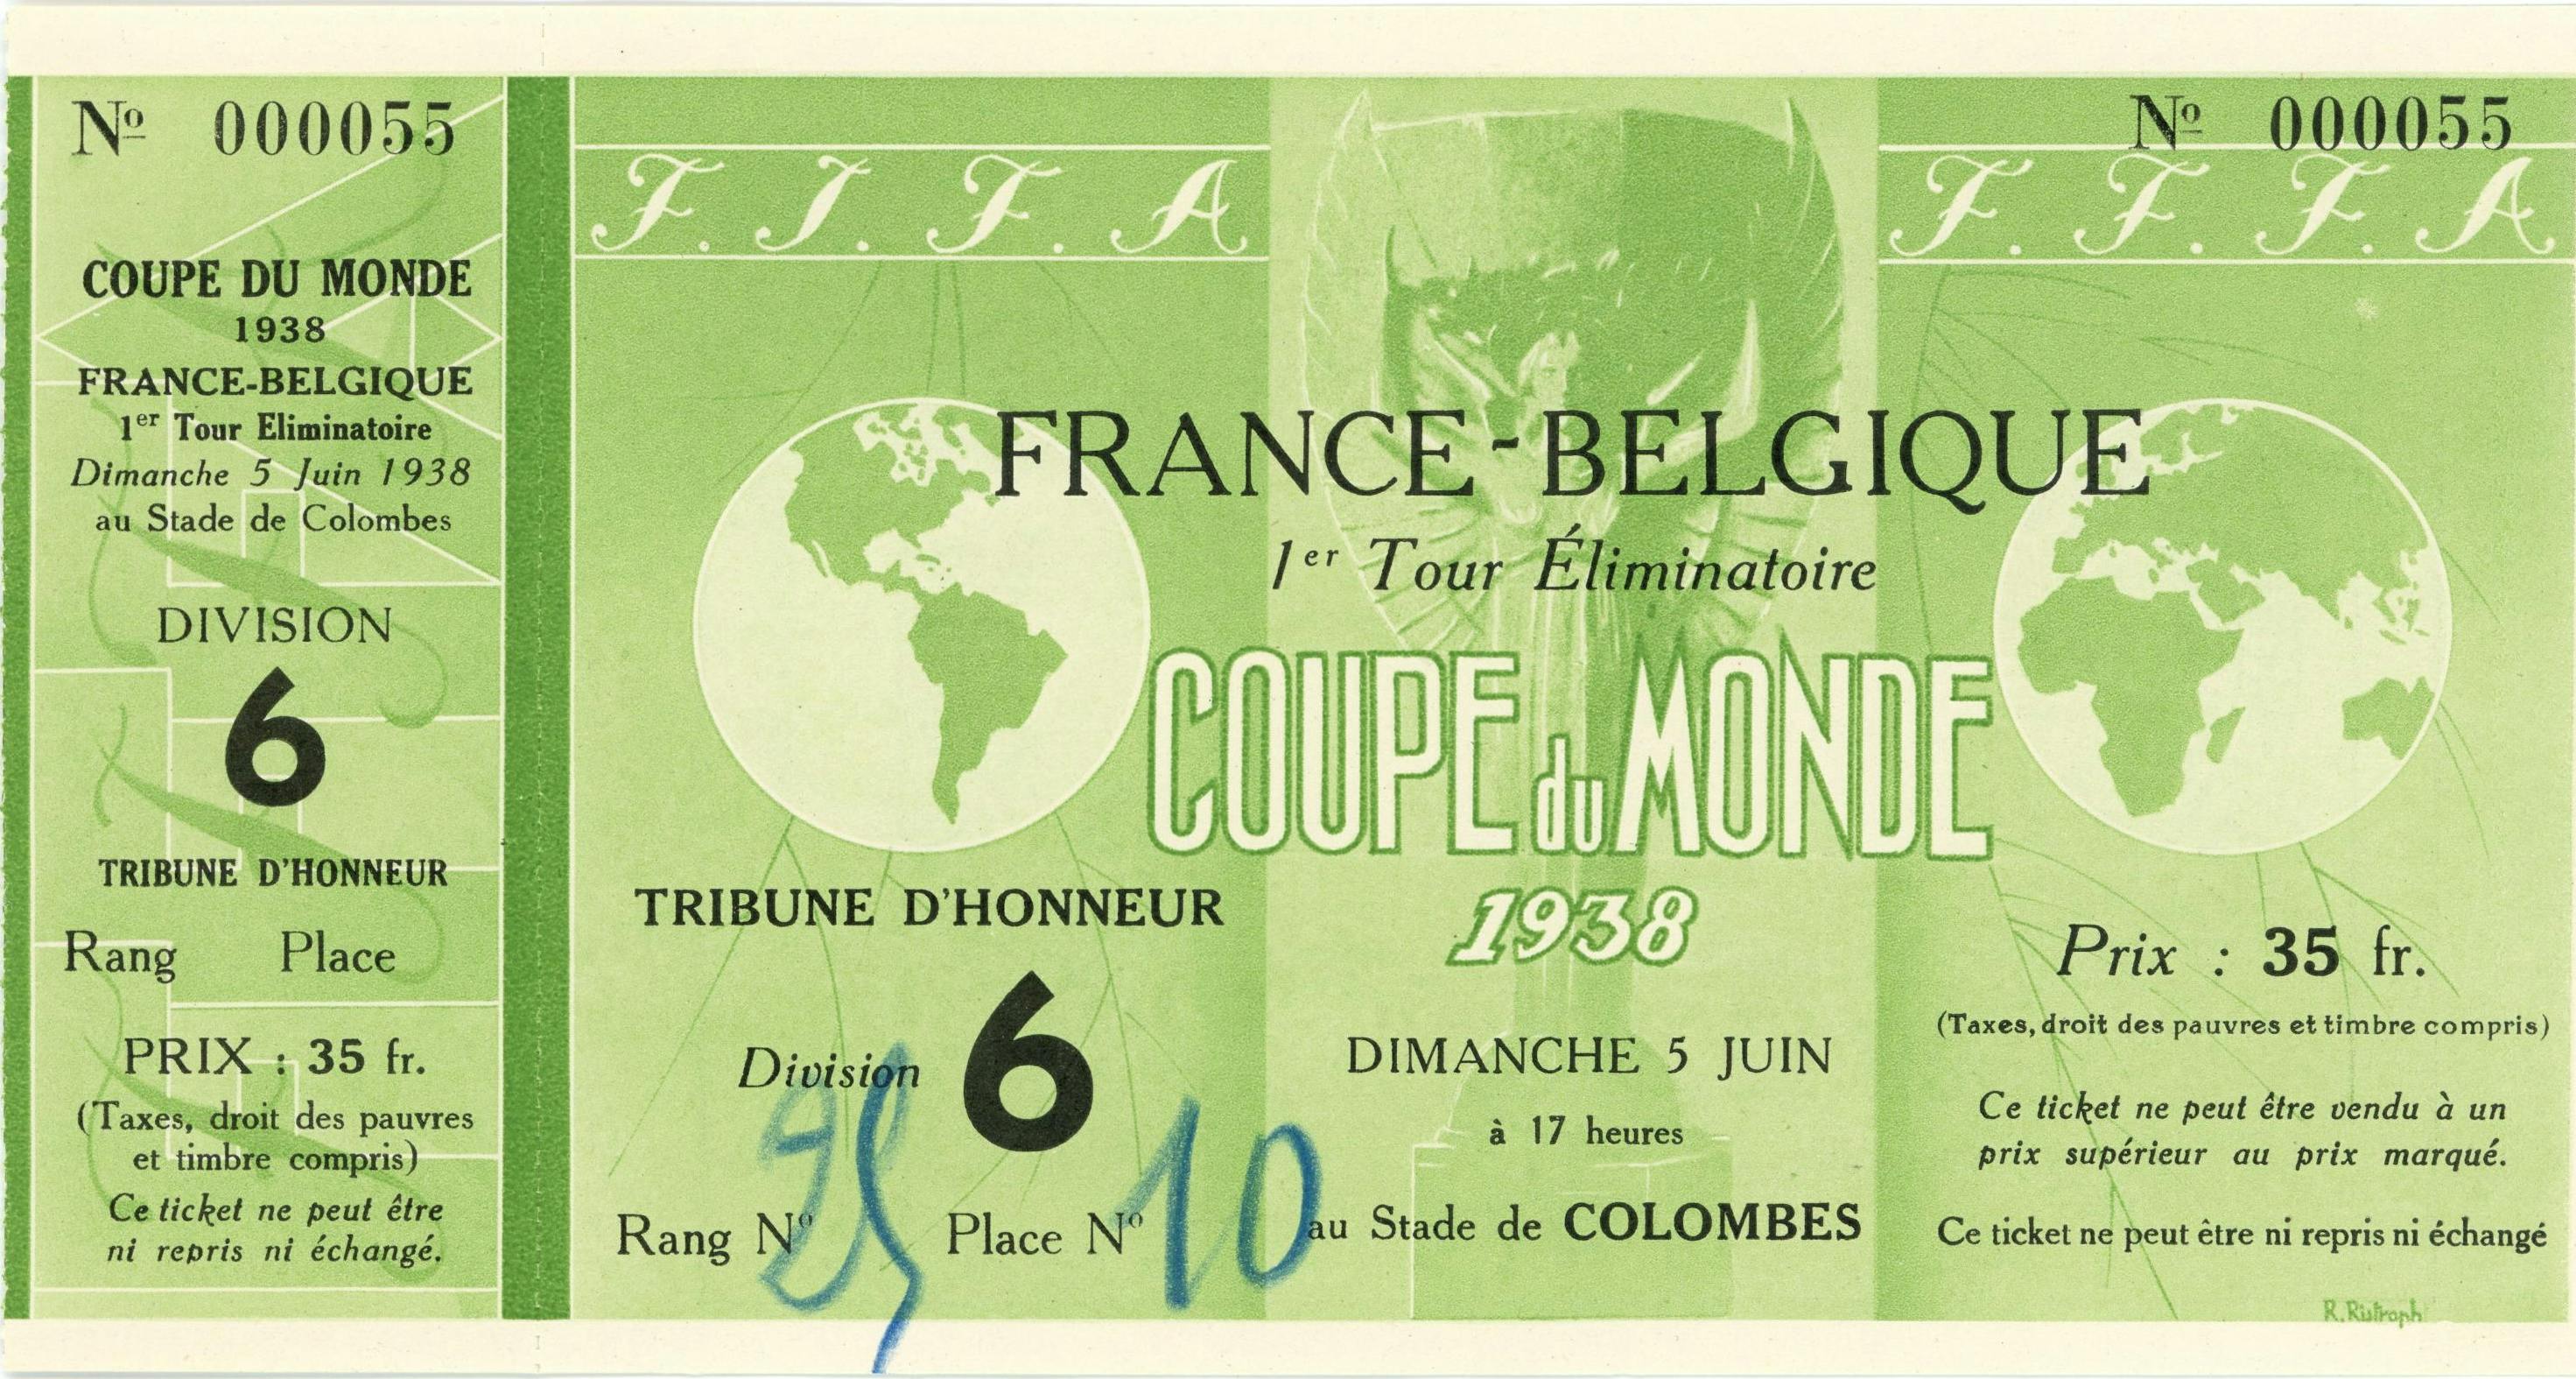 1938 FIFA World Cup ticket of match France-Belgium held at the Olympic Stadium in Colombes on June 5, 1938. © FIFA Museum, Zürich